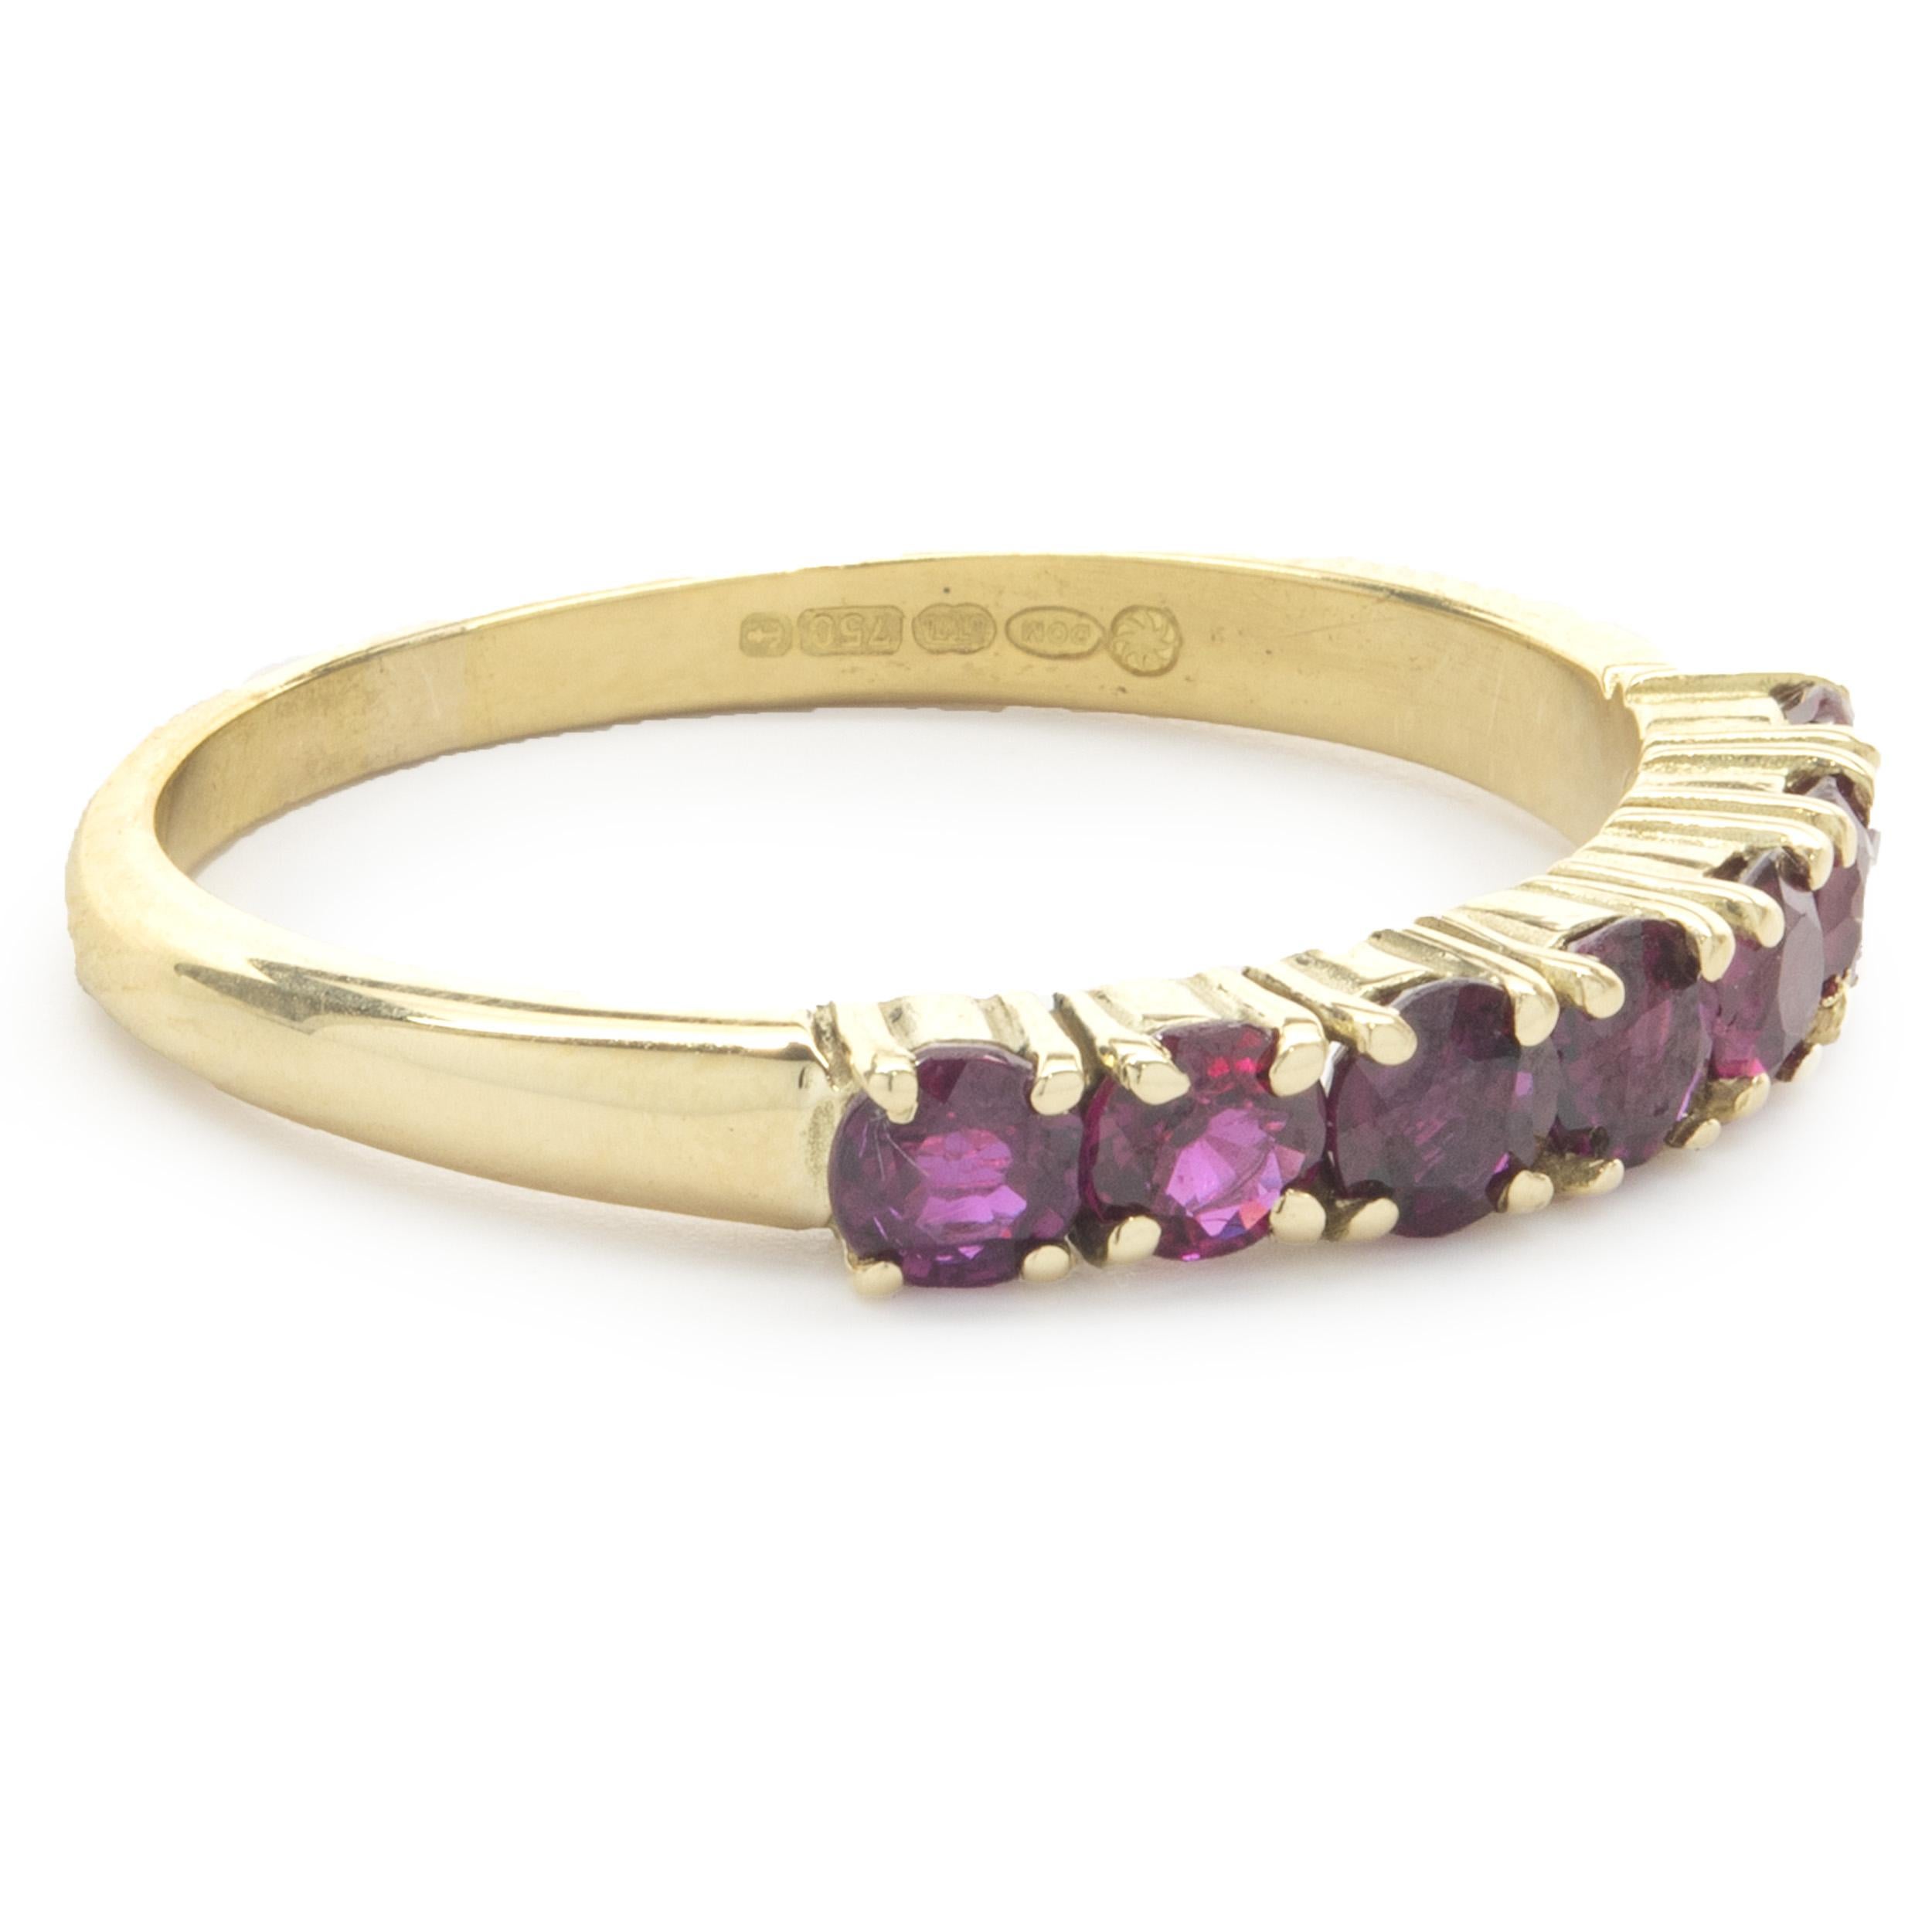 Designer: custom
Material: 14K yellow gold
Ruby: 7 round cut = 1.40cttw
Dimensions: ring top measures 3.32mm wide
Ring Size: 8.75 (complimentary sizing available)
Weight: 3.33 grams